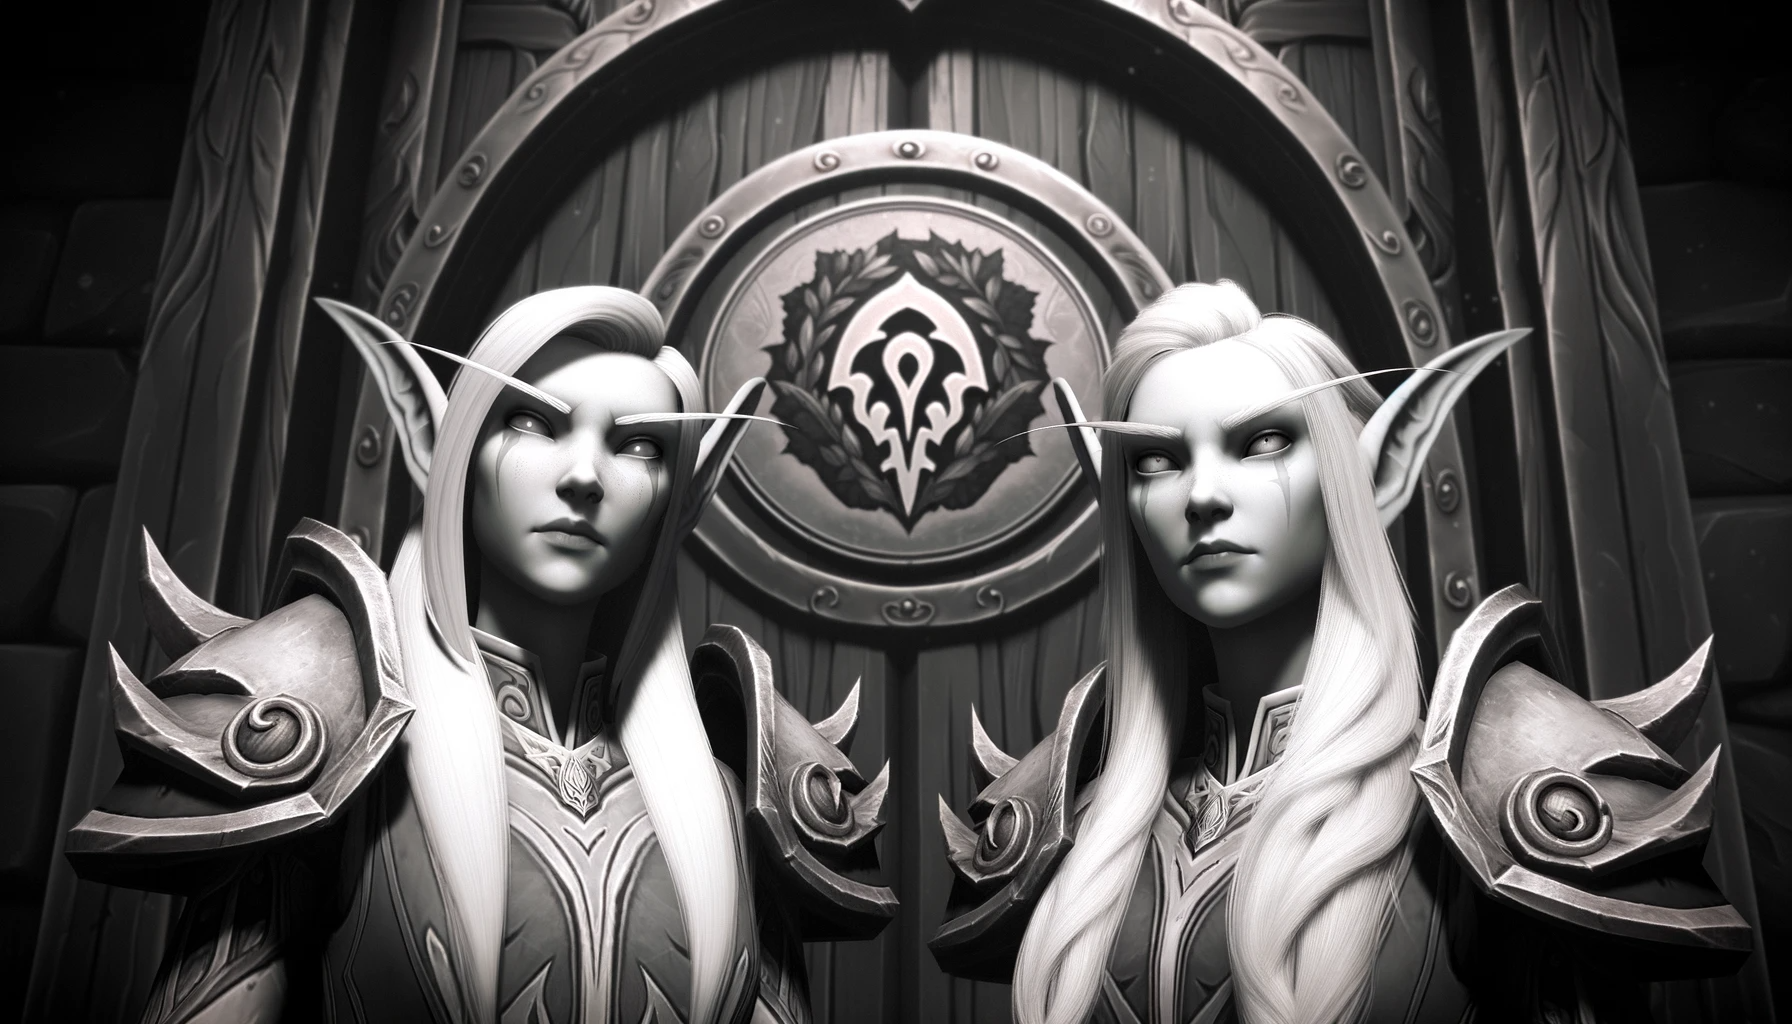 Teldra and Myrwen, standing strong at the entrance of the Avengers of Teldrassil's headquarters. Their determination is evident, and the guild emblem is proudly displayed on the door.